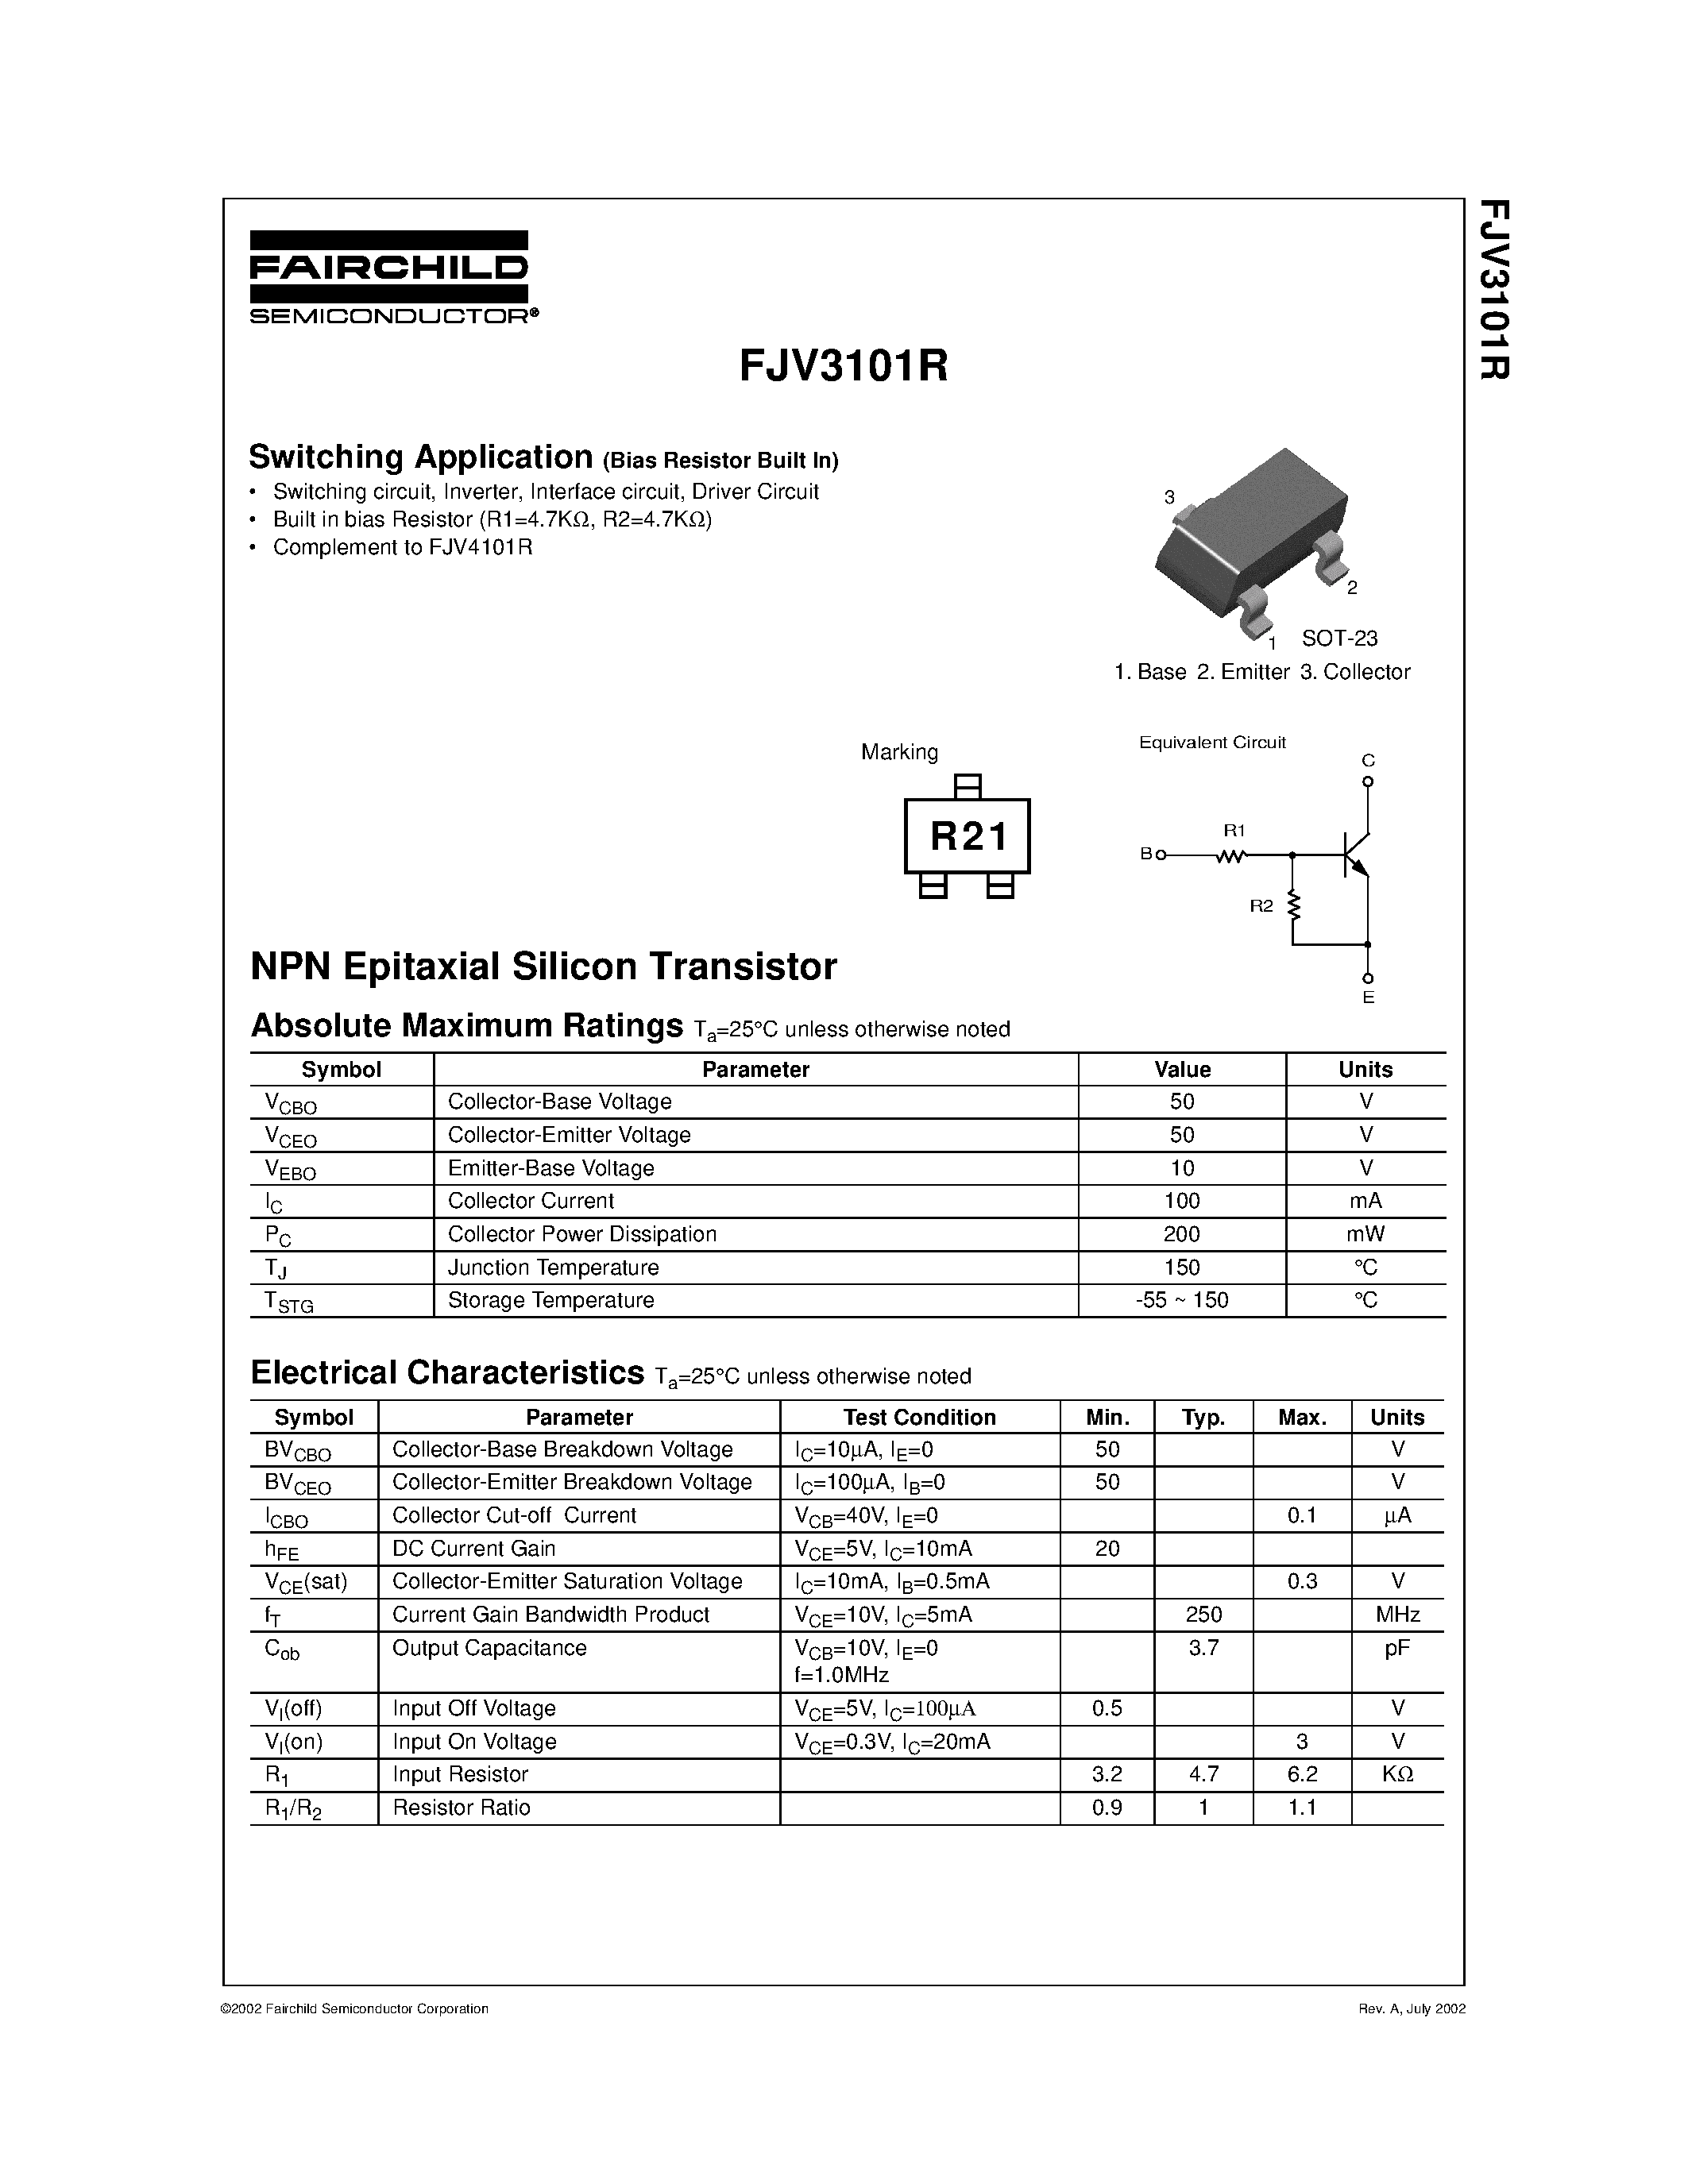 Datasheet FJV3101 - NPN Epitaxial Silicon Transistor page 1